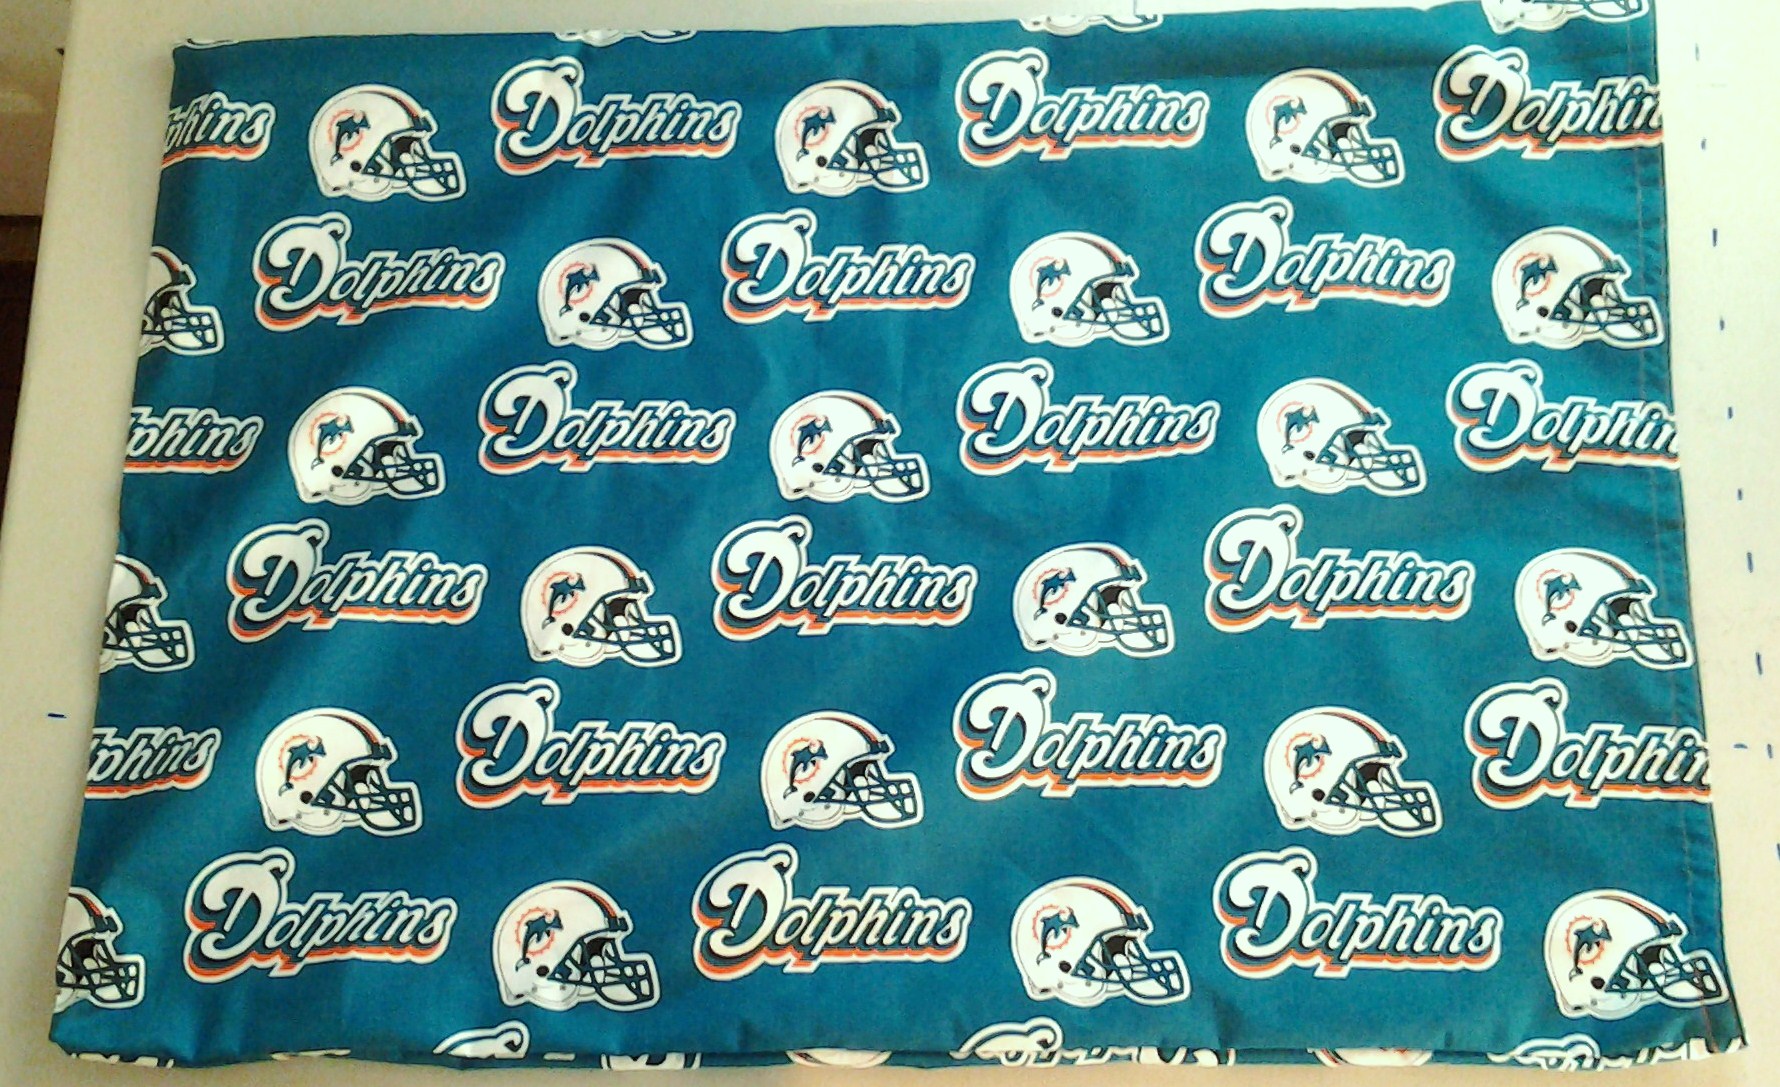 Pillowcase of the NFL Miami Dolphins 241966